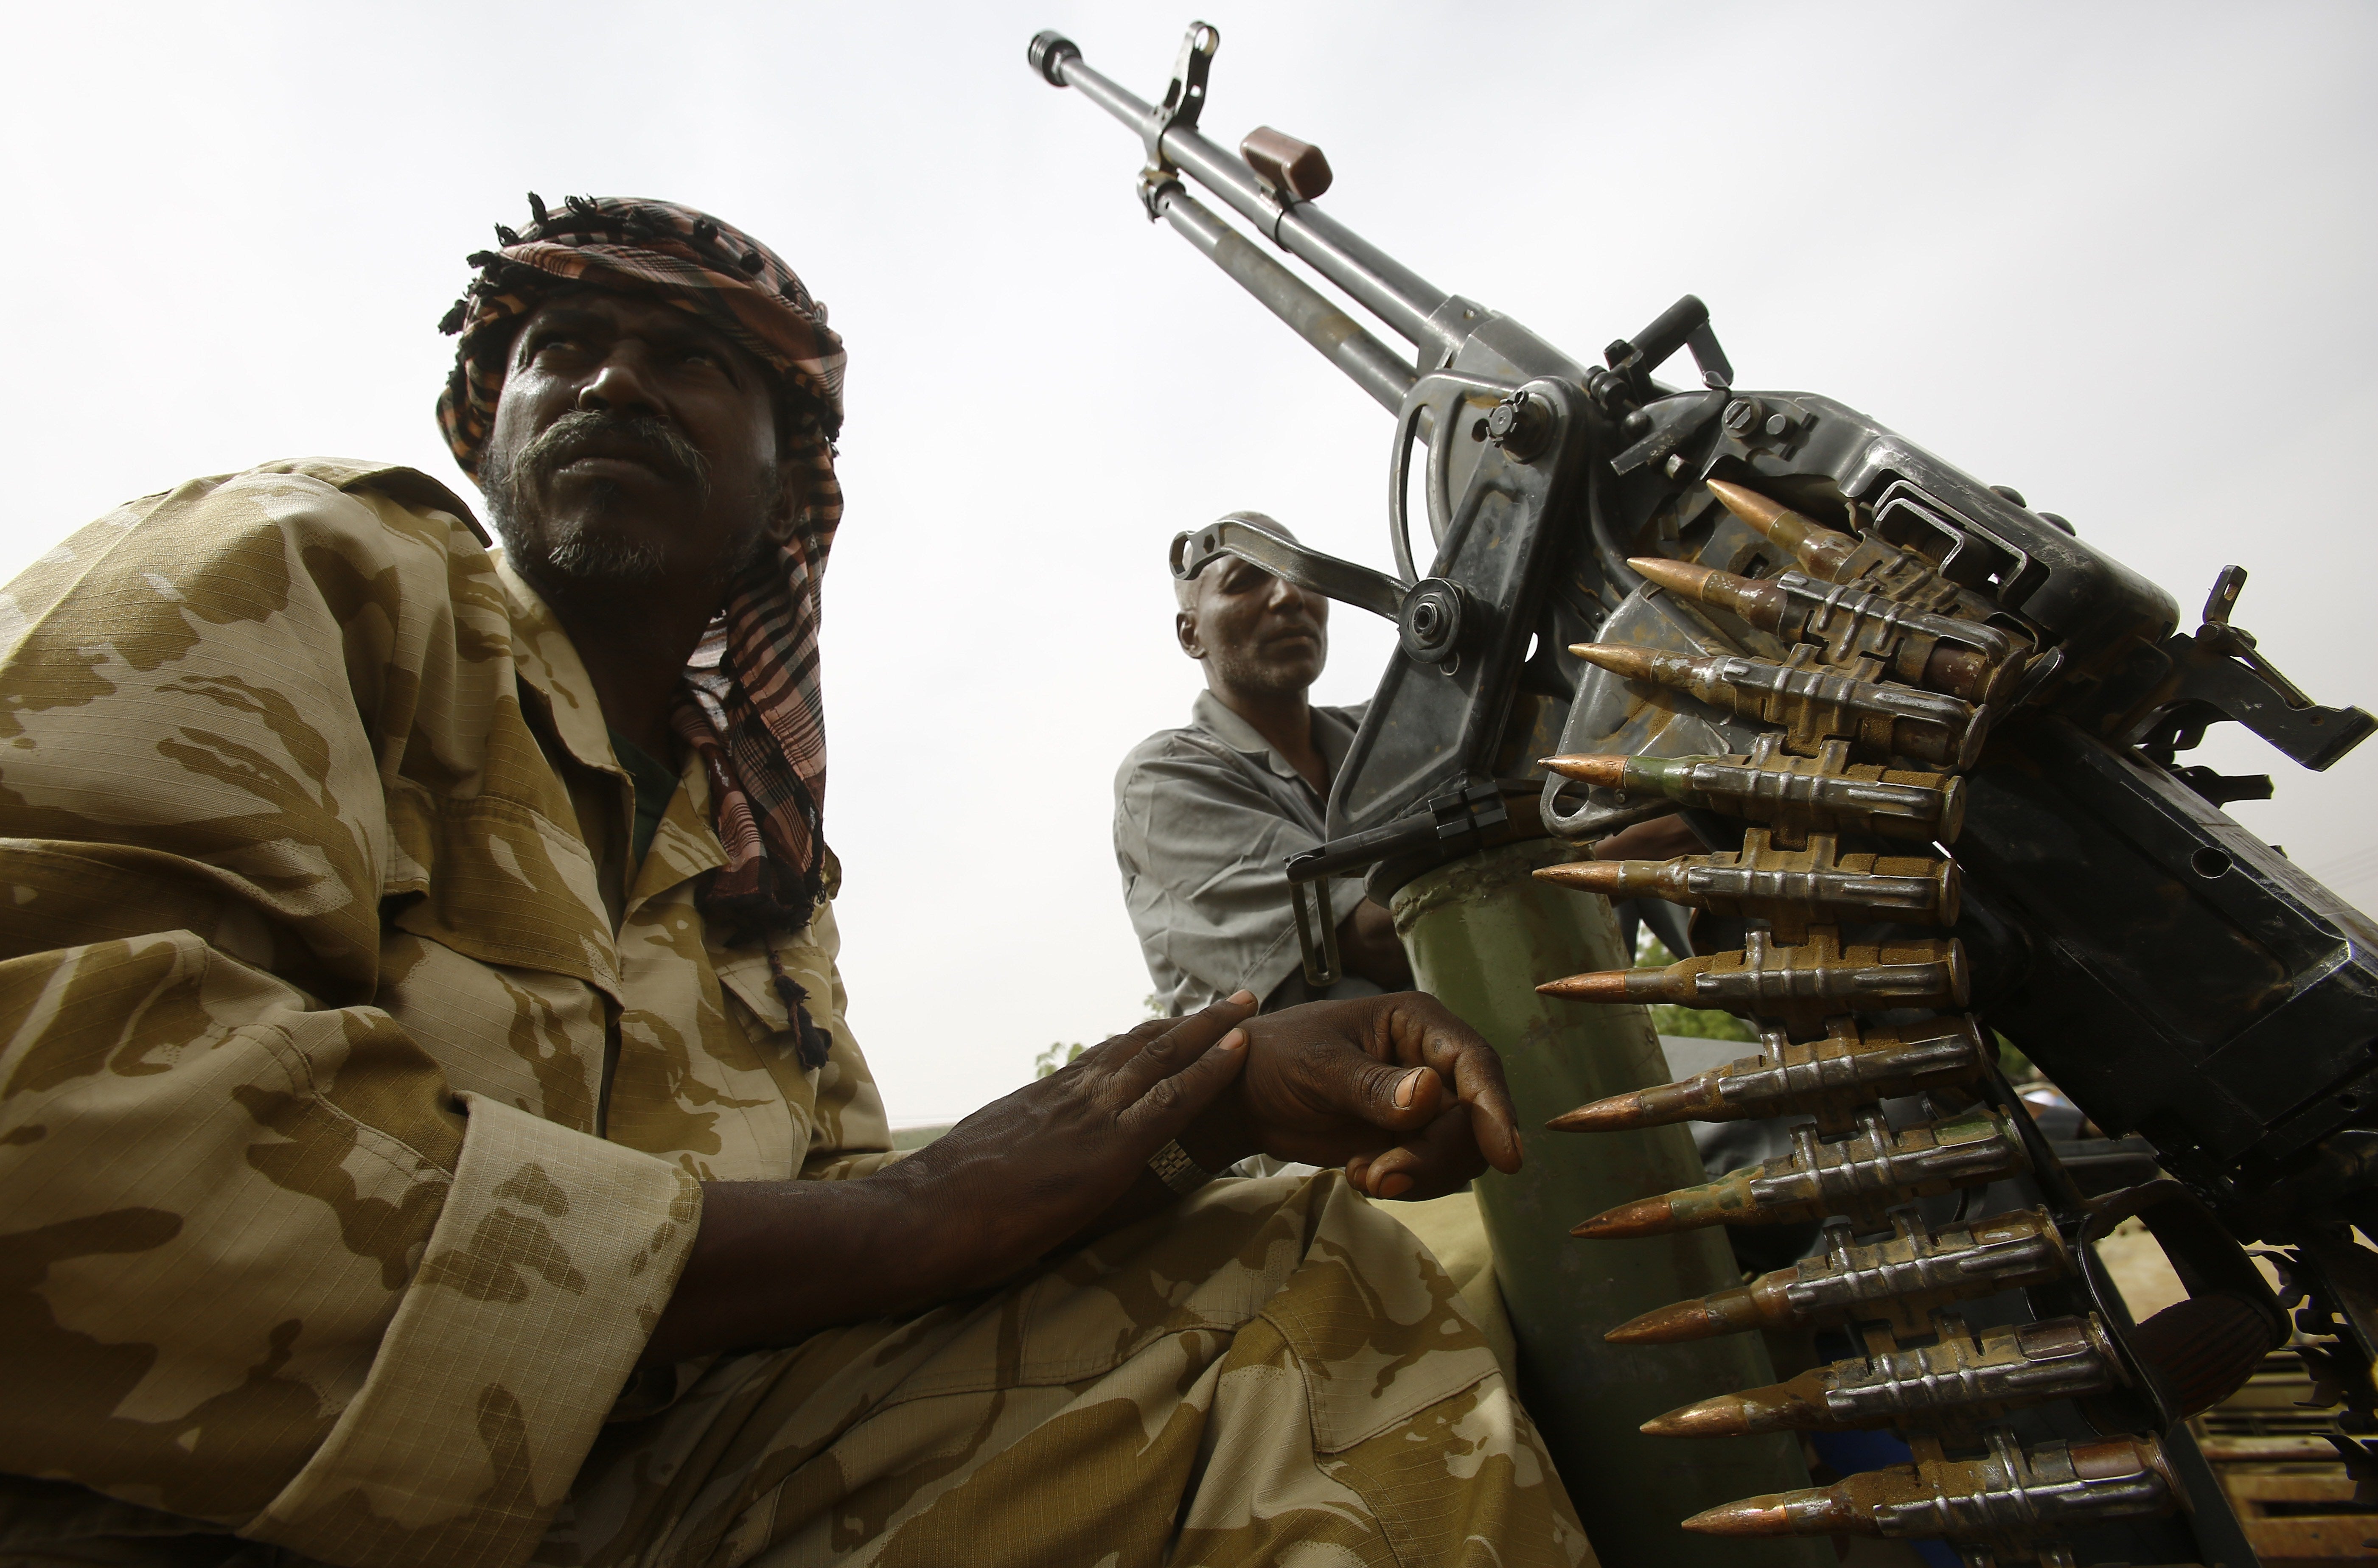 Fighters from the Sudanese Rapid Support Forces sit on an armed vehicle in the city of Nyala, in south Darfur, on May 3, 2015